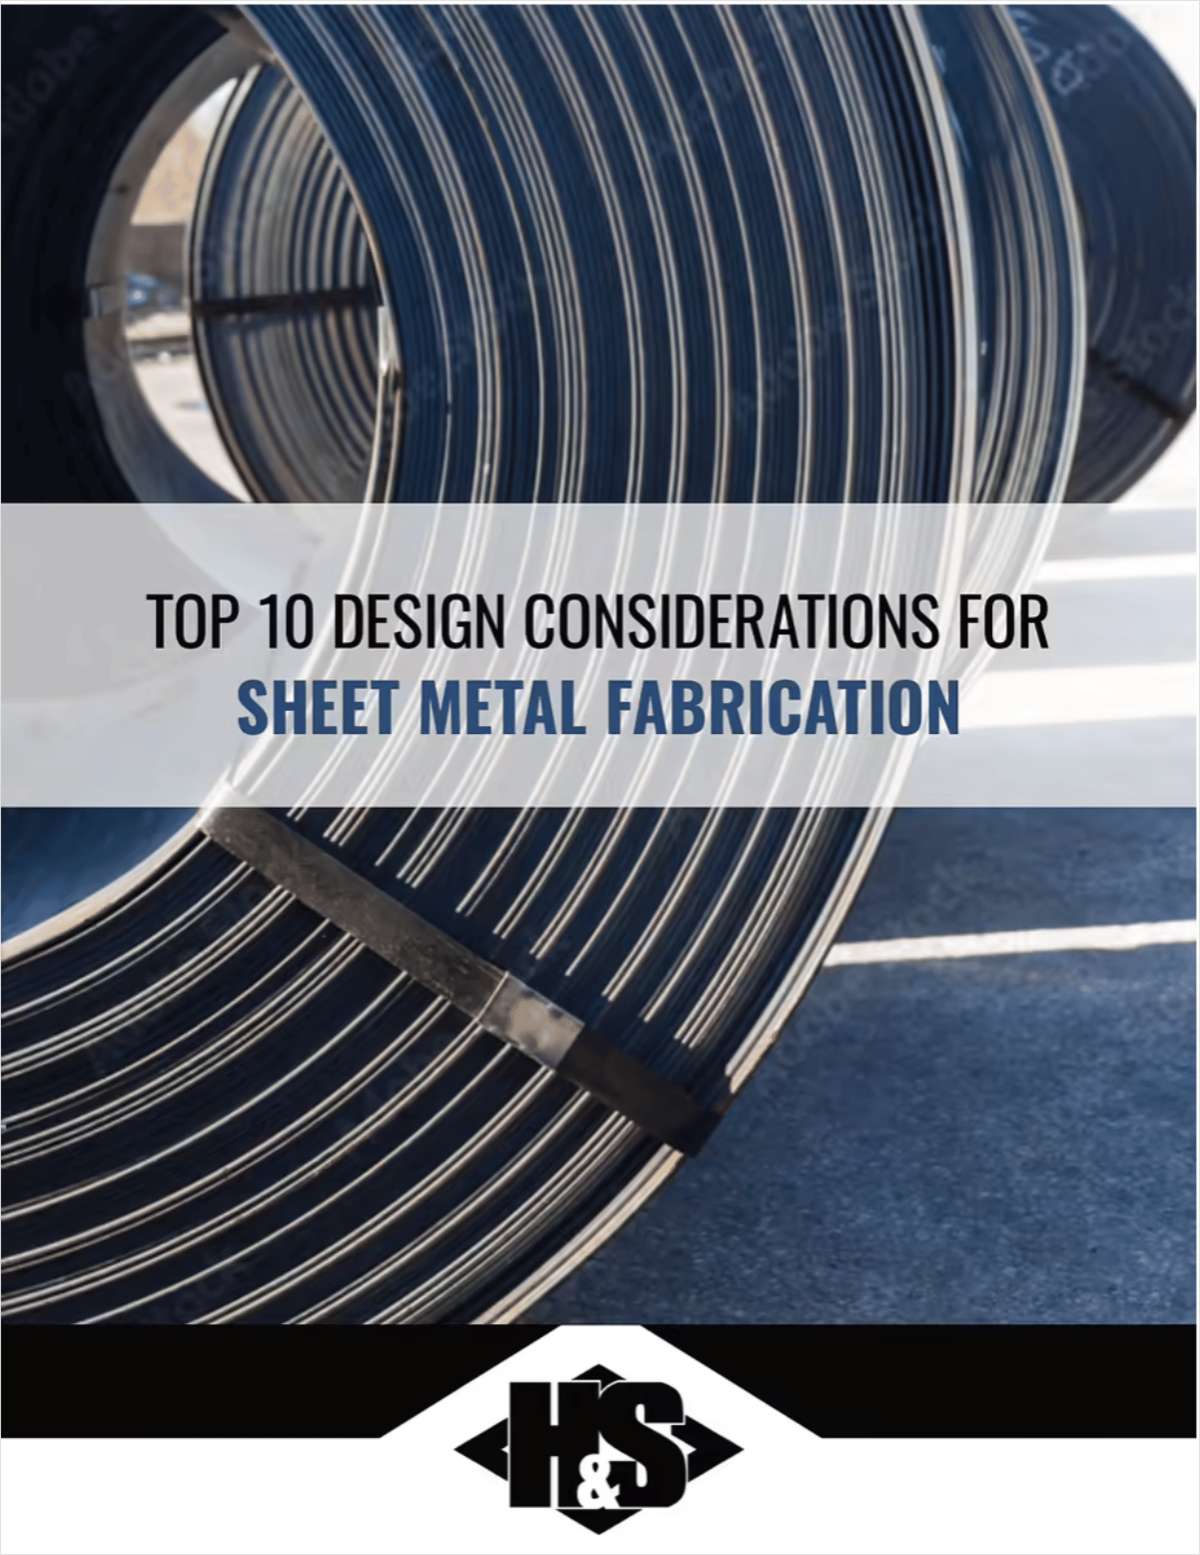 Top 10 Design Considerations For Sheet Metal Fabrication